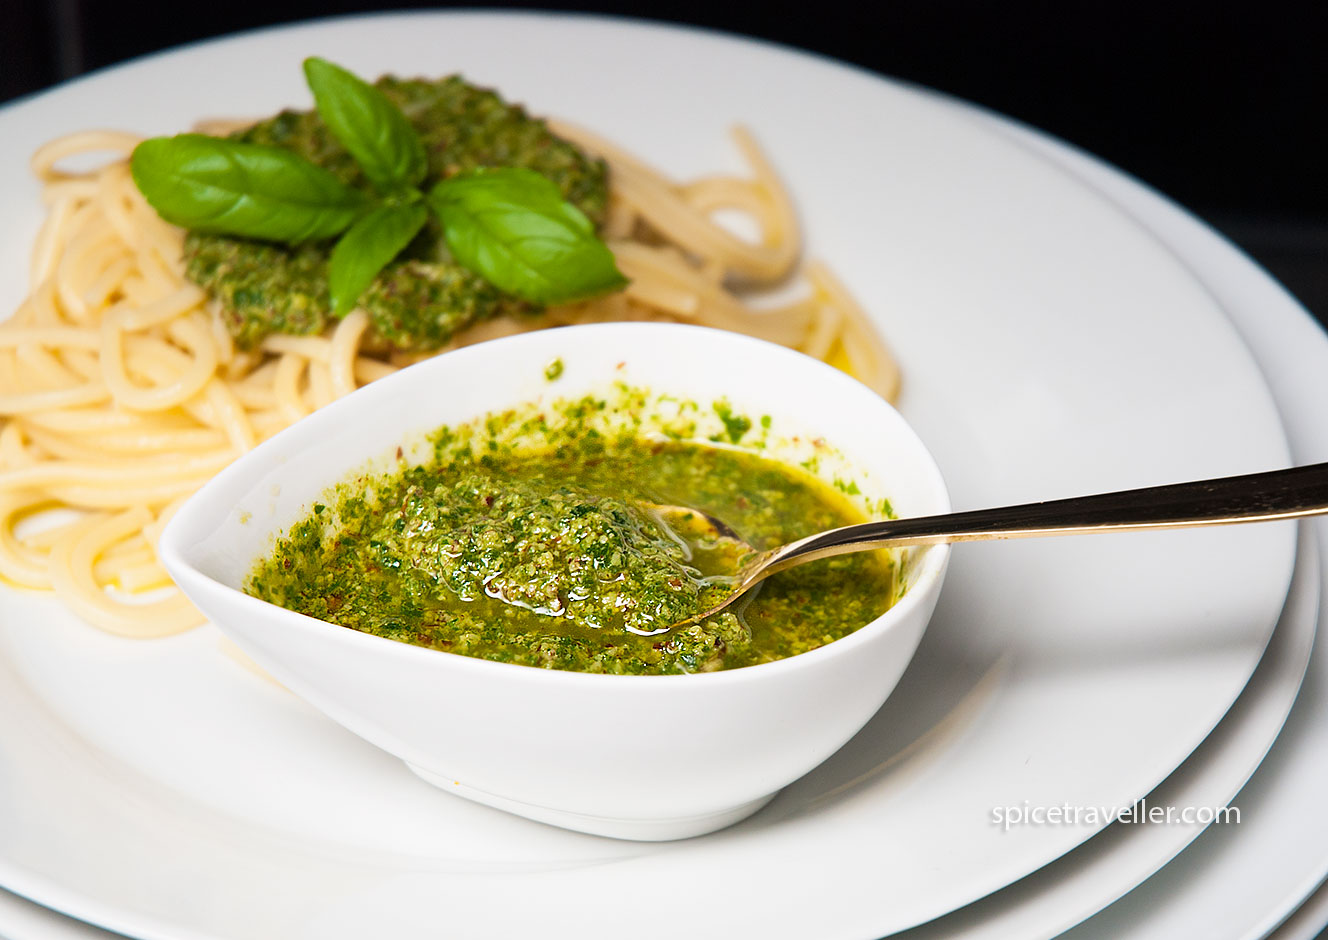 Basil and Walnut Pesto - Vibrant and aromatic homemade sauce made with fresh basil and crunchy walnuts